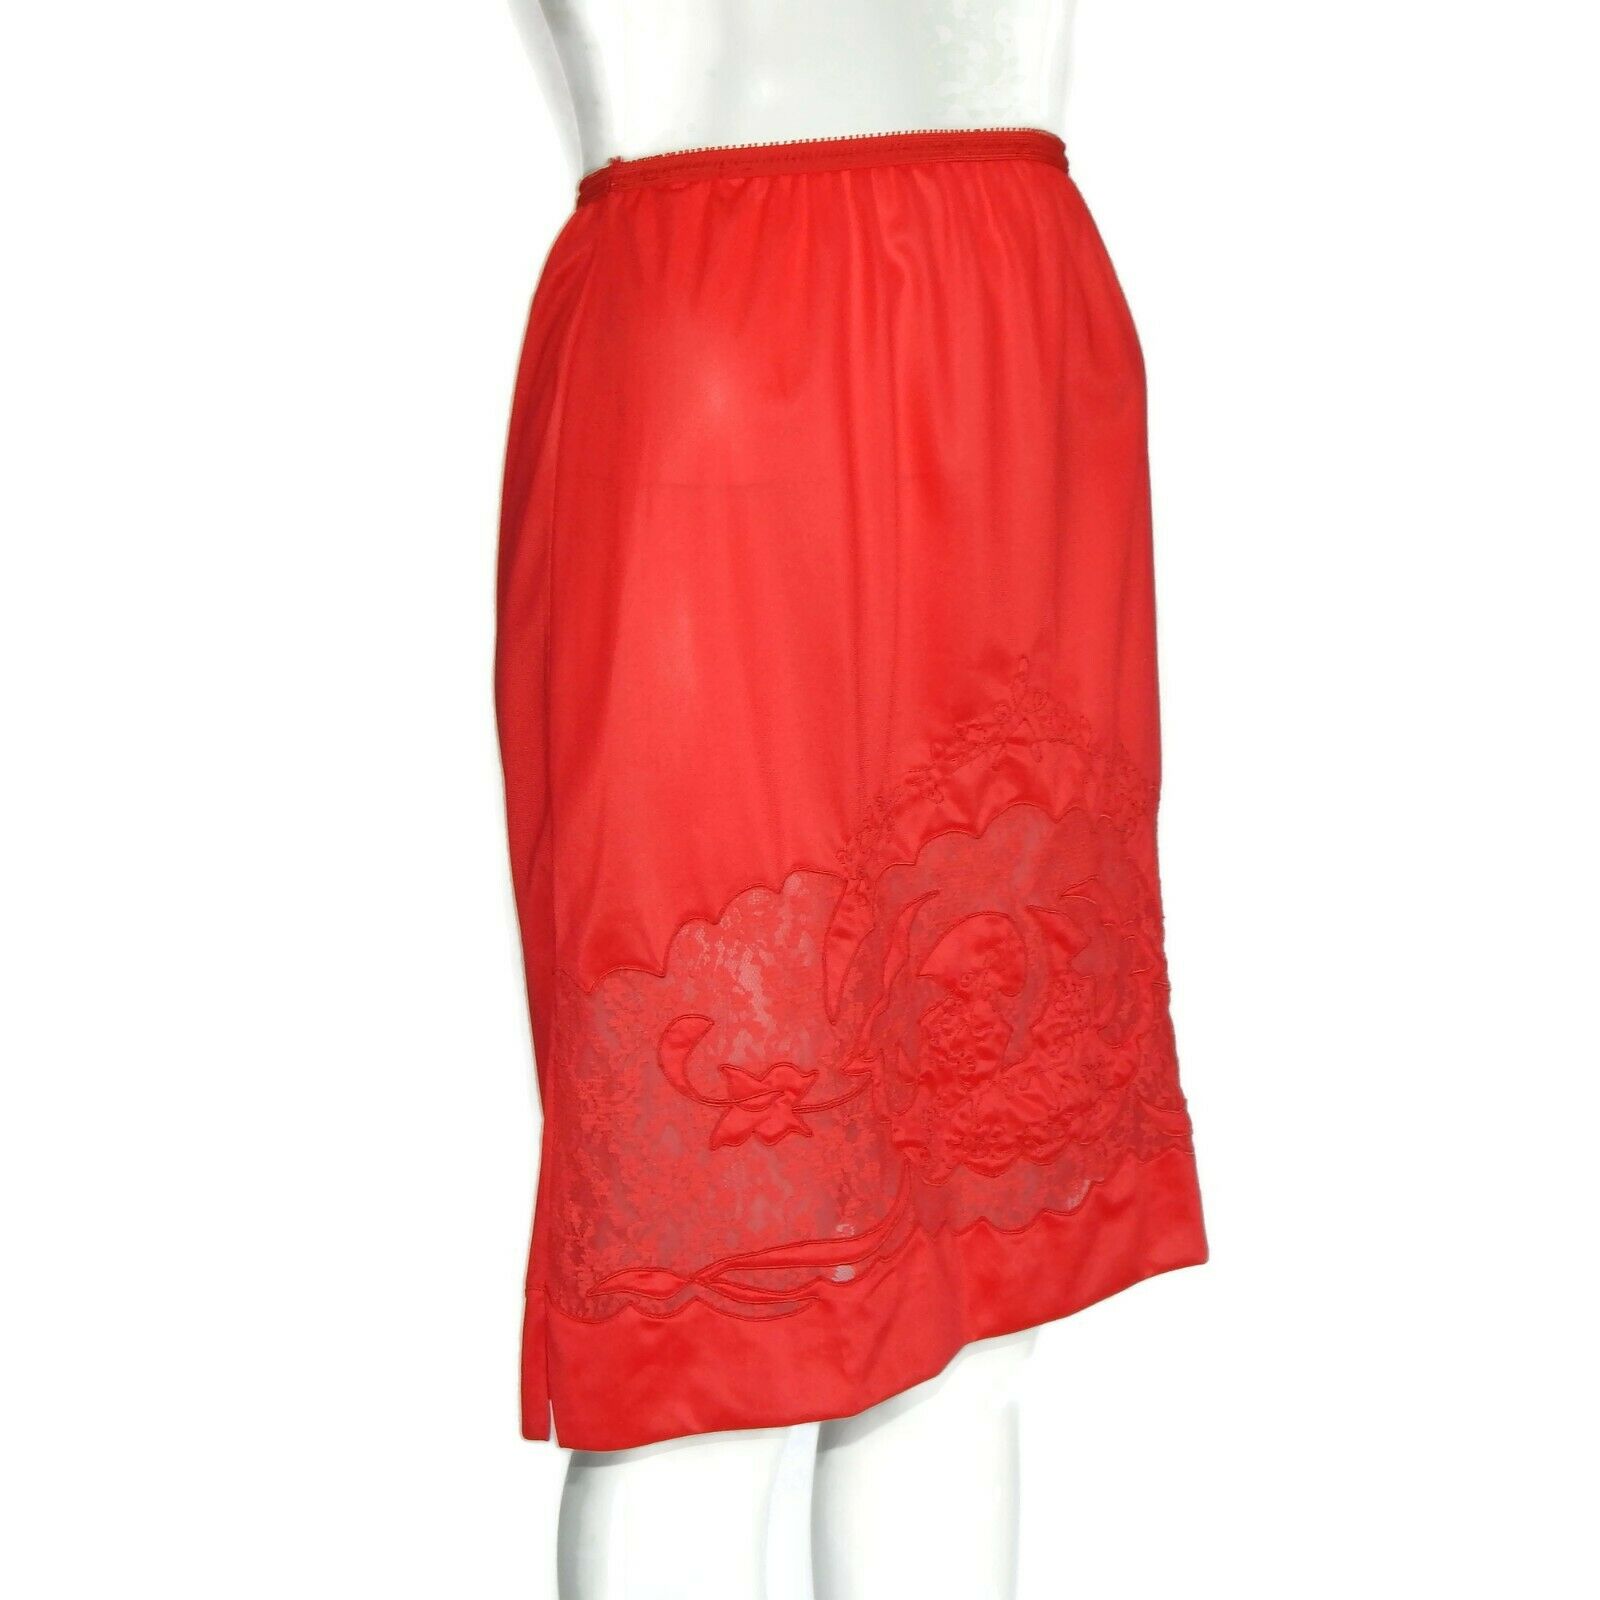 Vintage 1950s Embroidered Lace Slip Skirt Red Lingerie 60s Pin-up ...